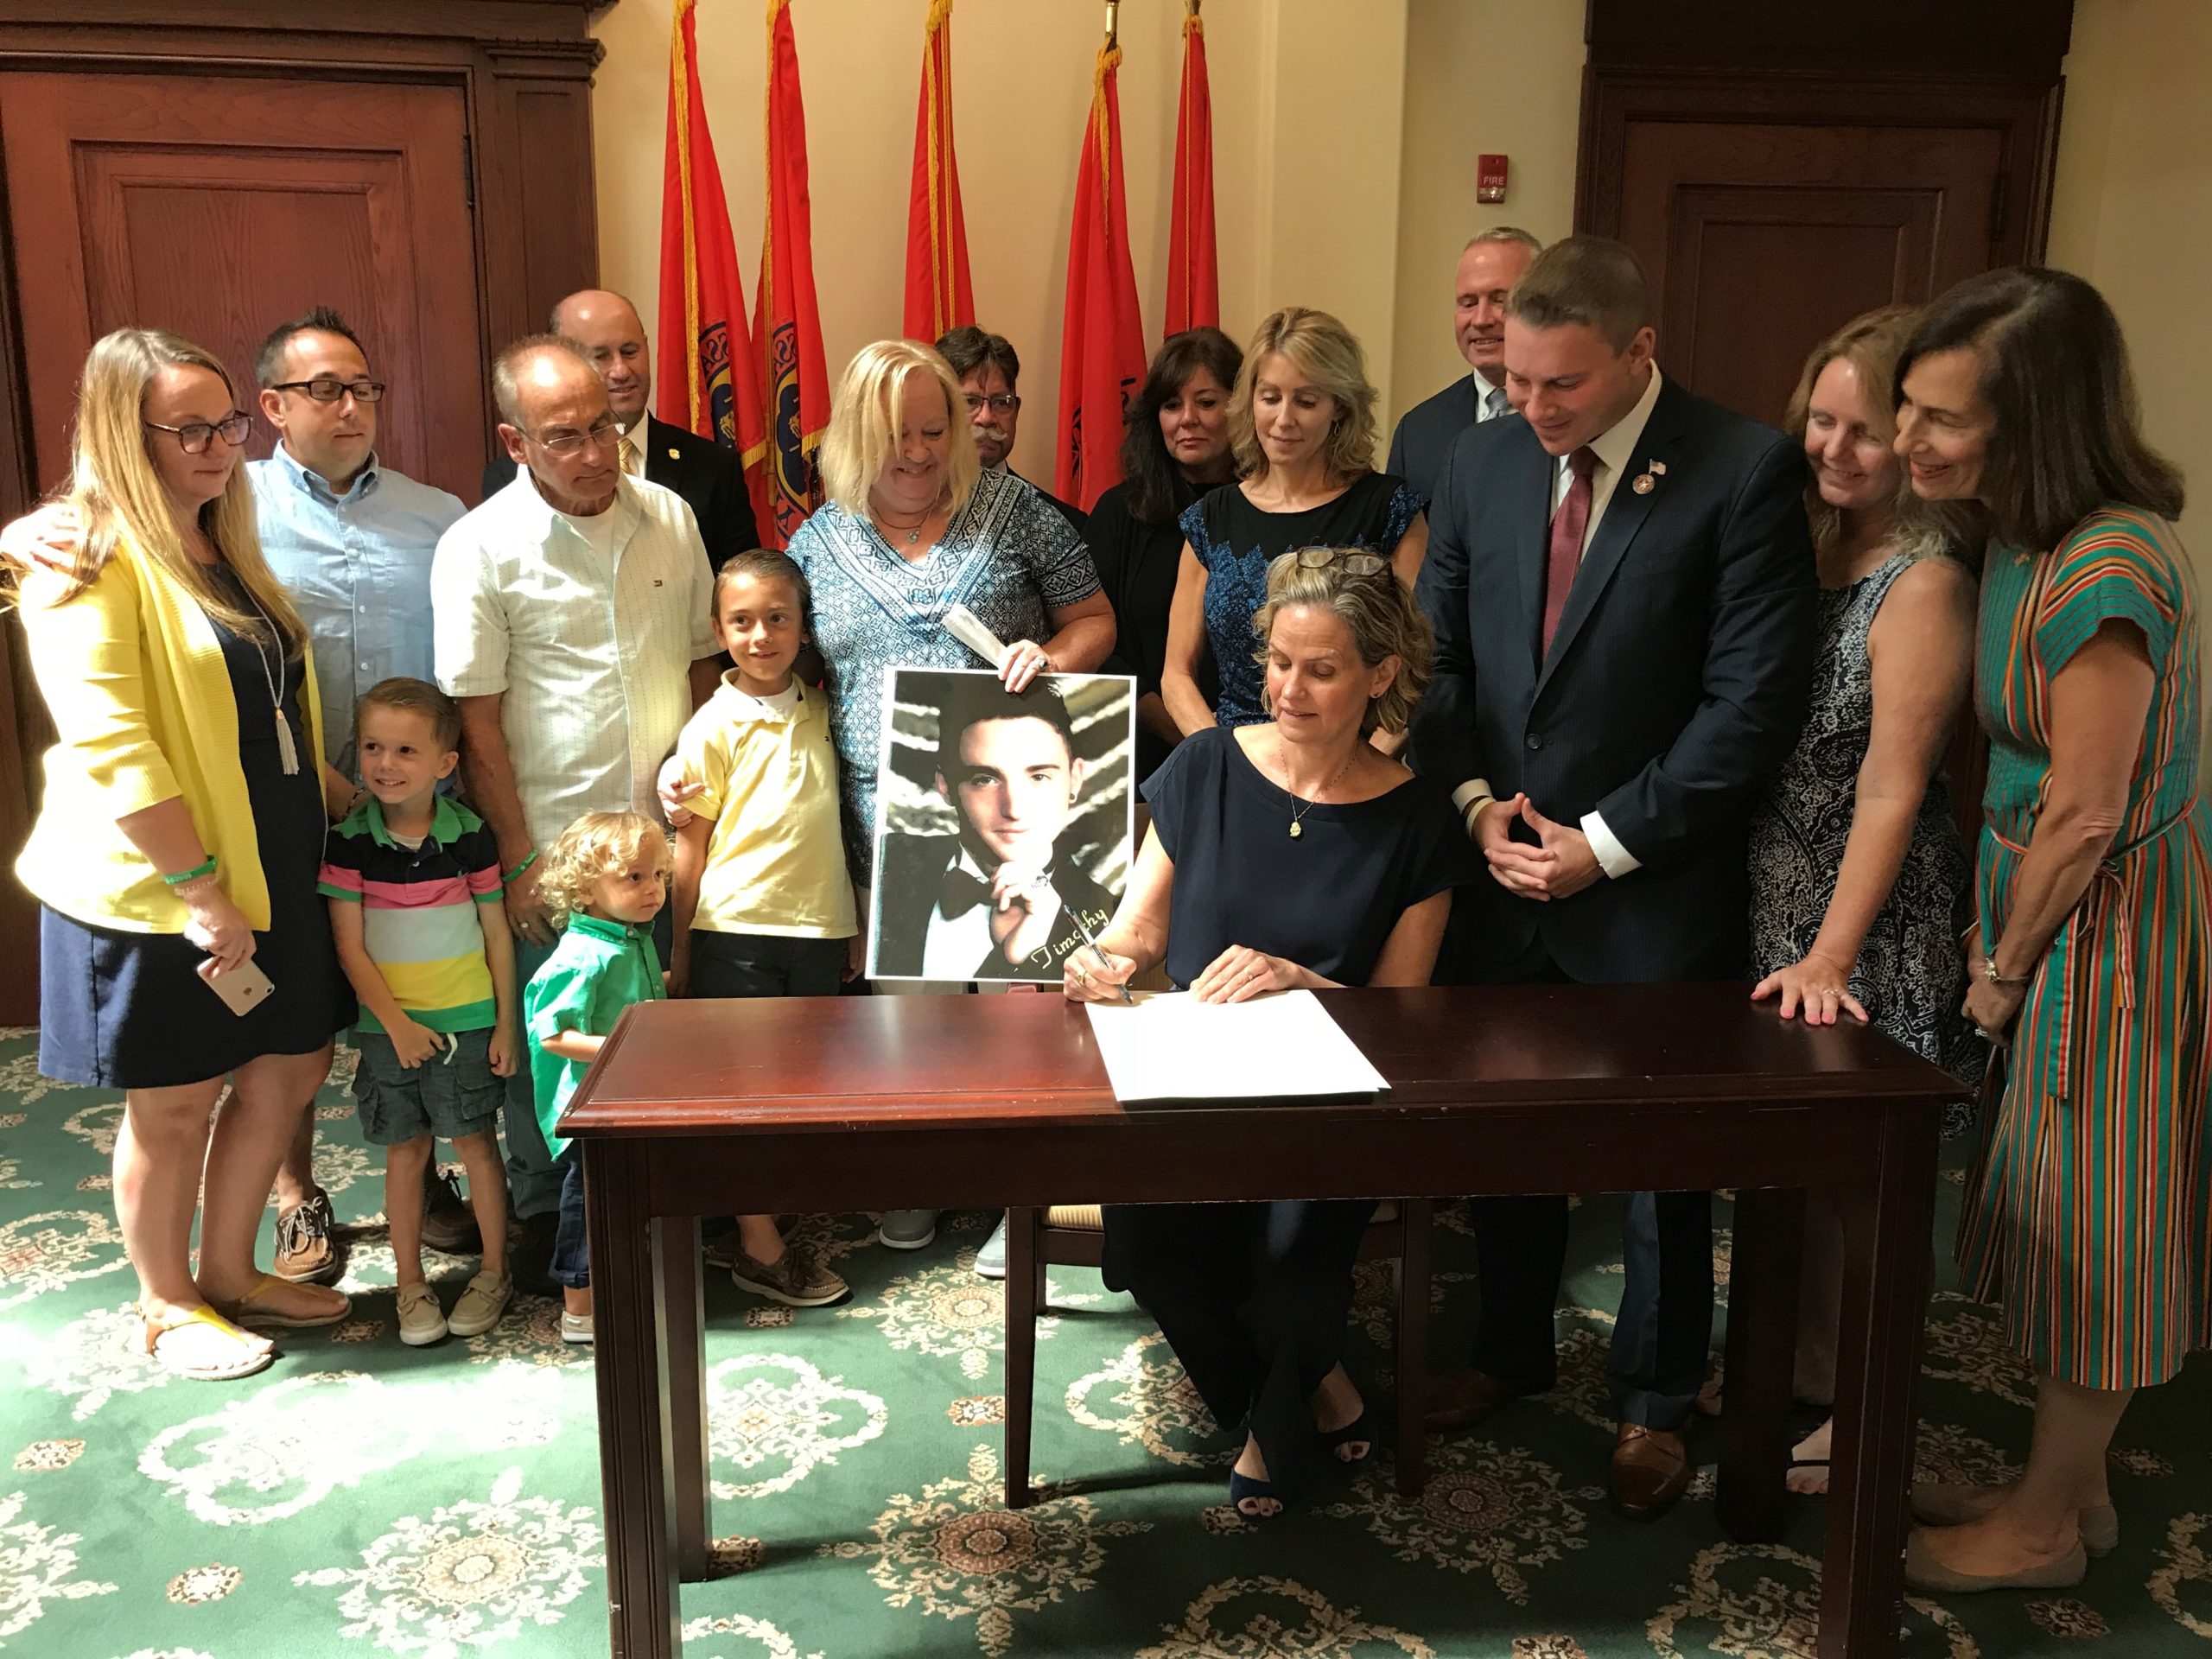 Nassau County Executive Laura Curran signs a pair of substance abuse bills into law as Legislator Joshua Lafazan and others look on. (Photo courtesy of Nassau County Executive Laura Curran's office)